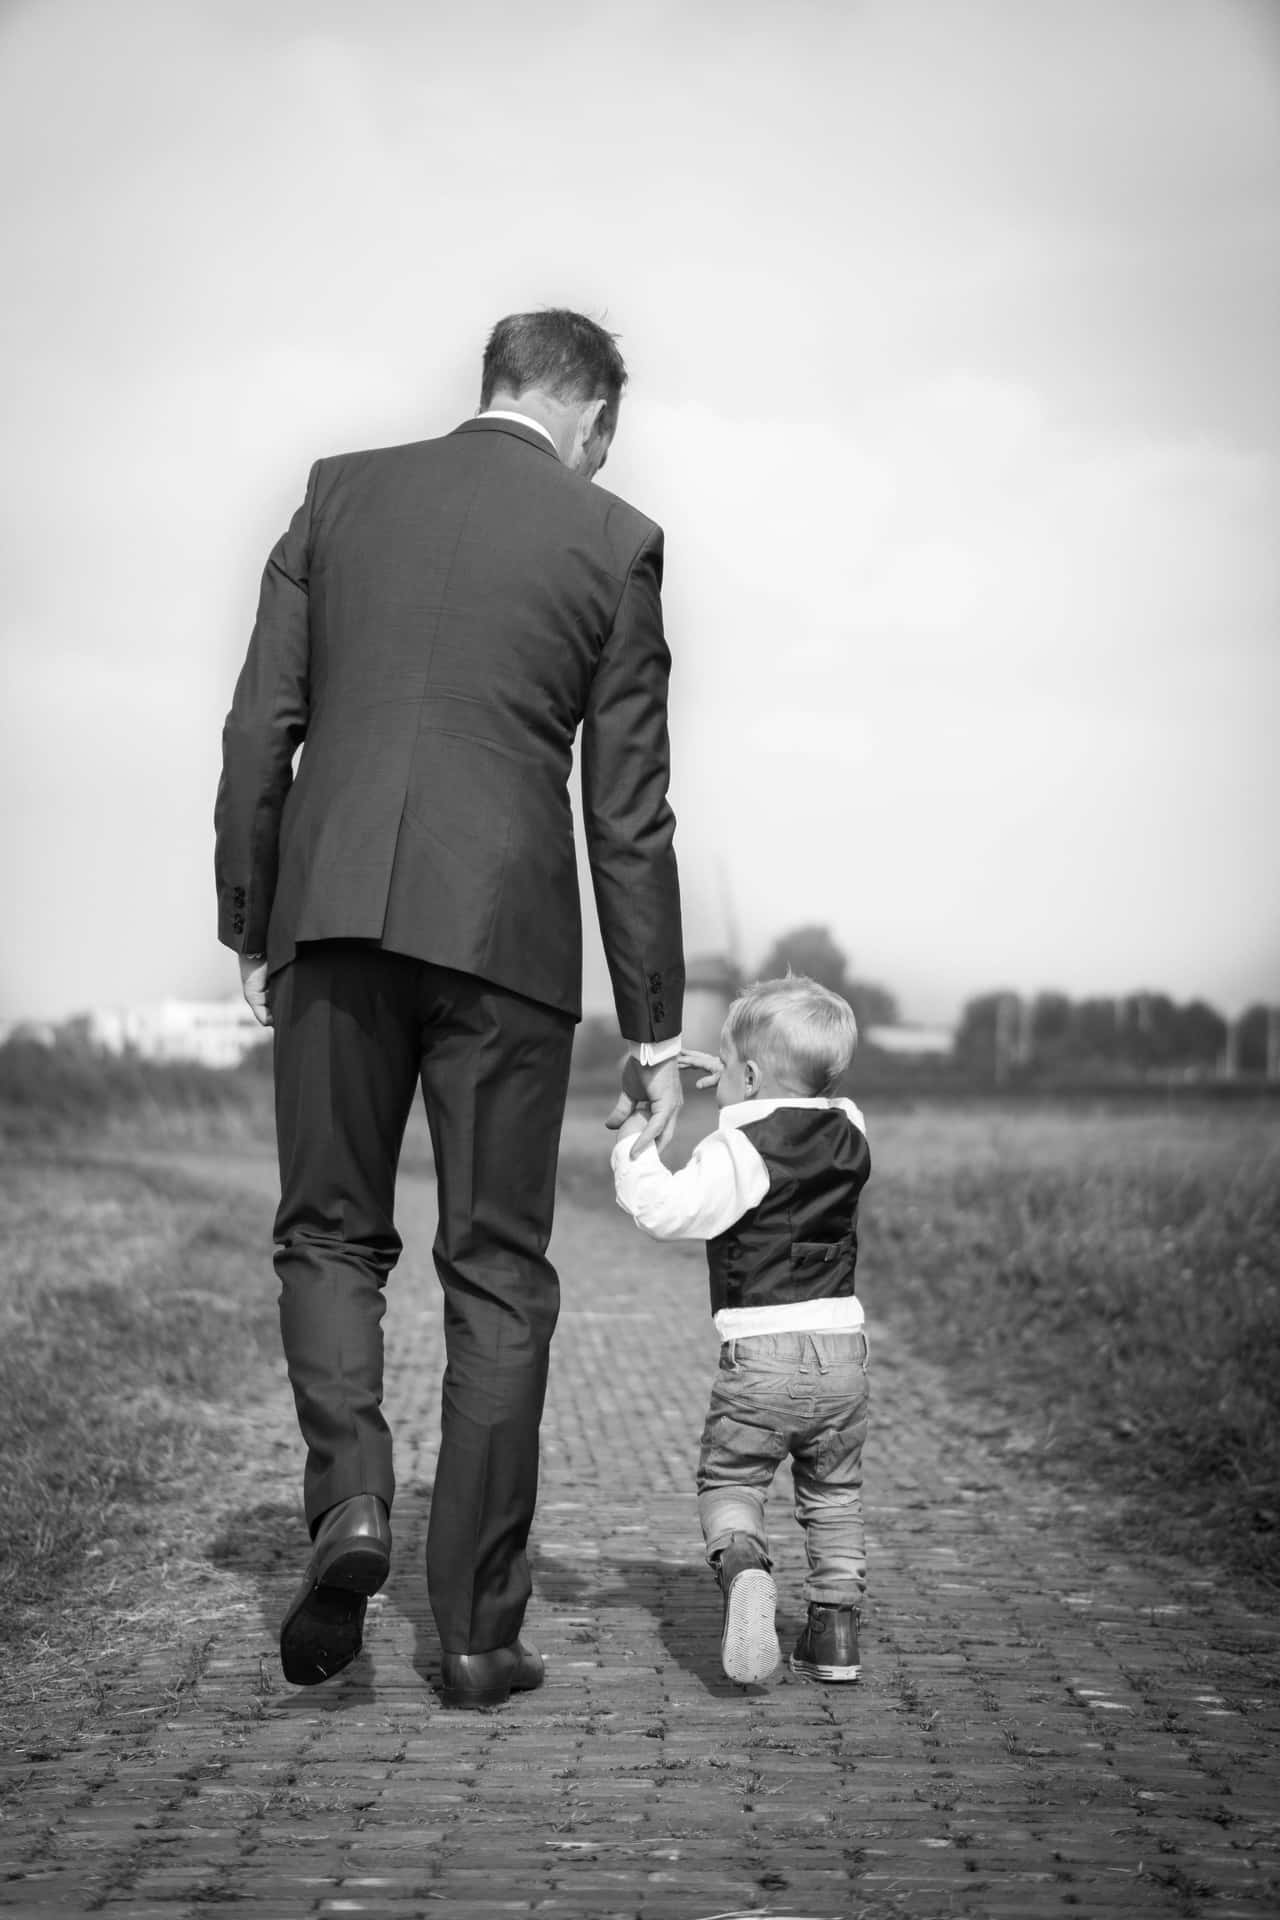 A Man In A Suit Walking With A Child